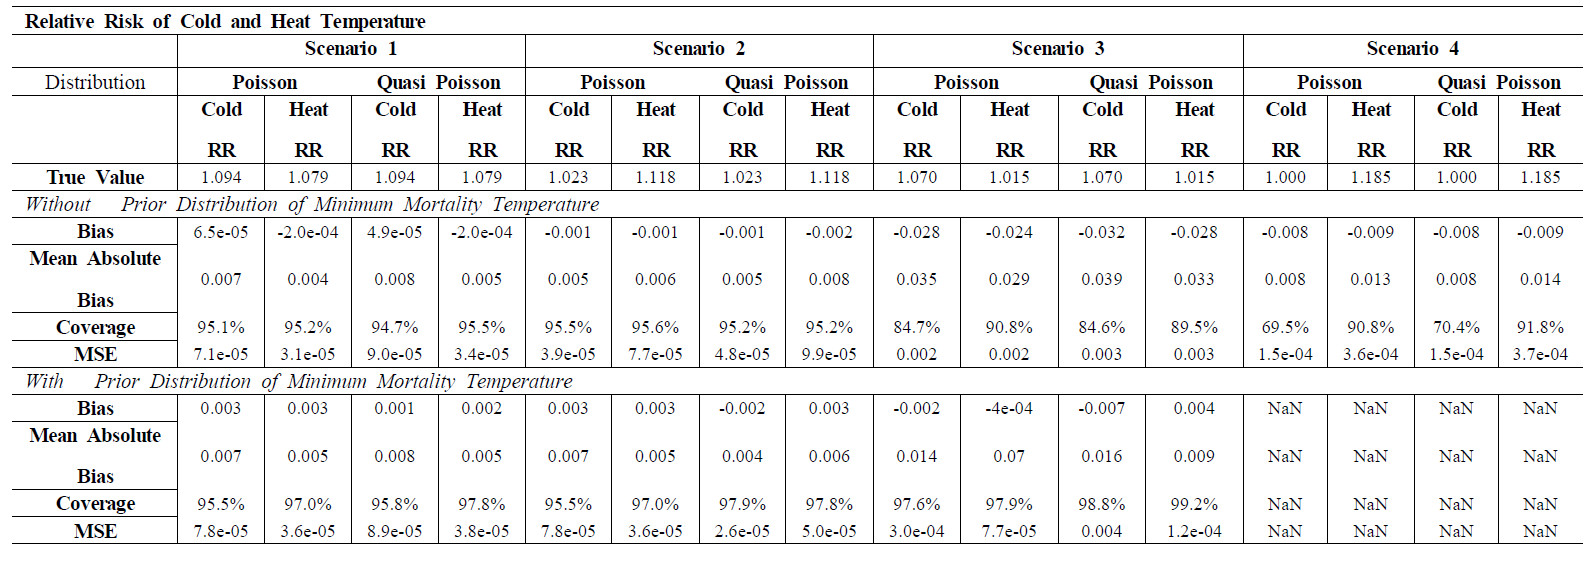 Simulation results for relative risk (1000 replicates) using two different approaches (without/with distribution assumption of minimum mortality temperature) by four different scenarios